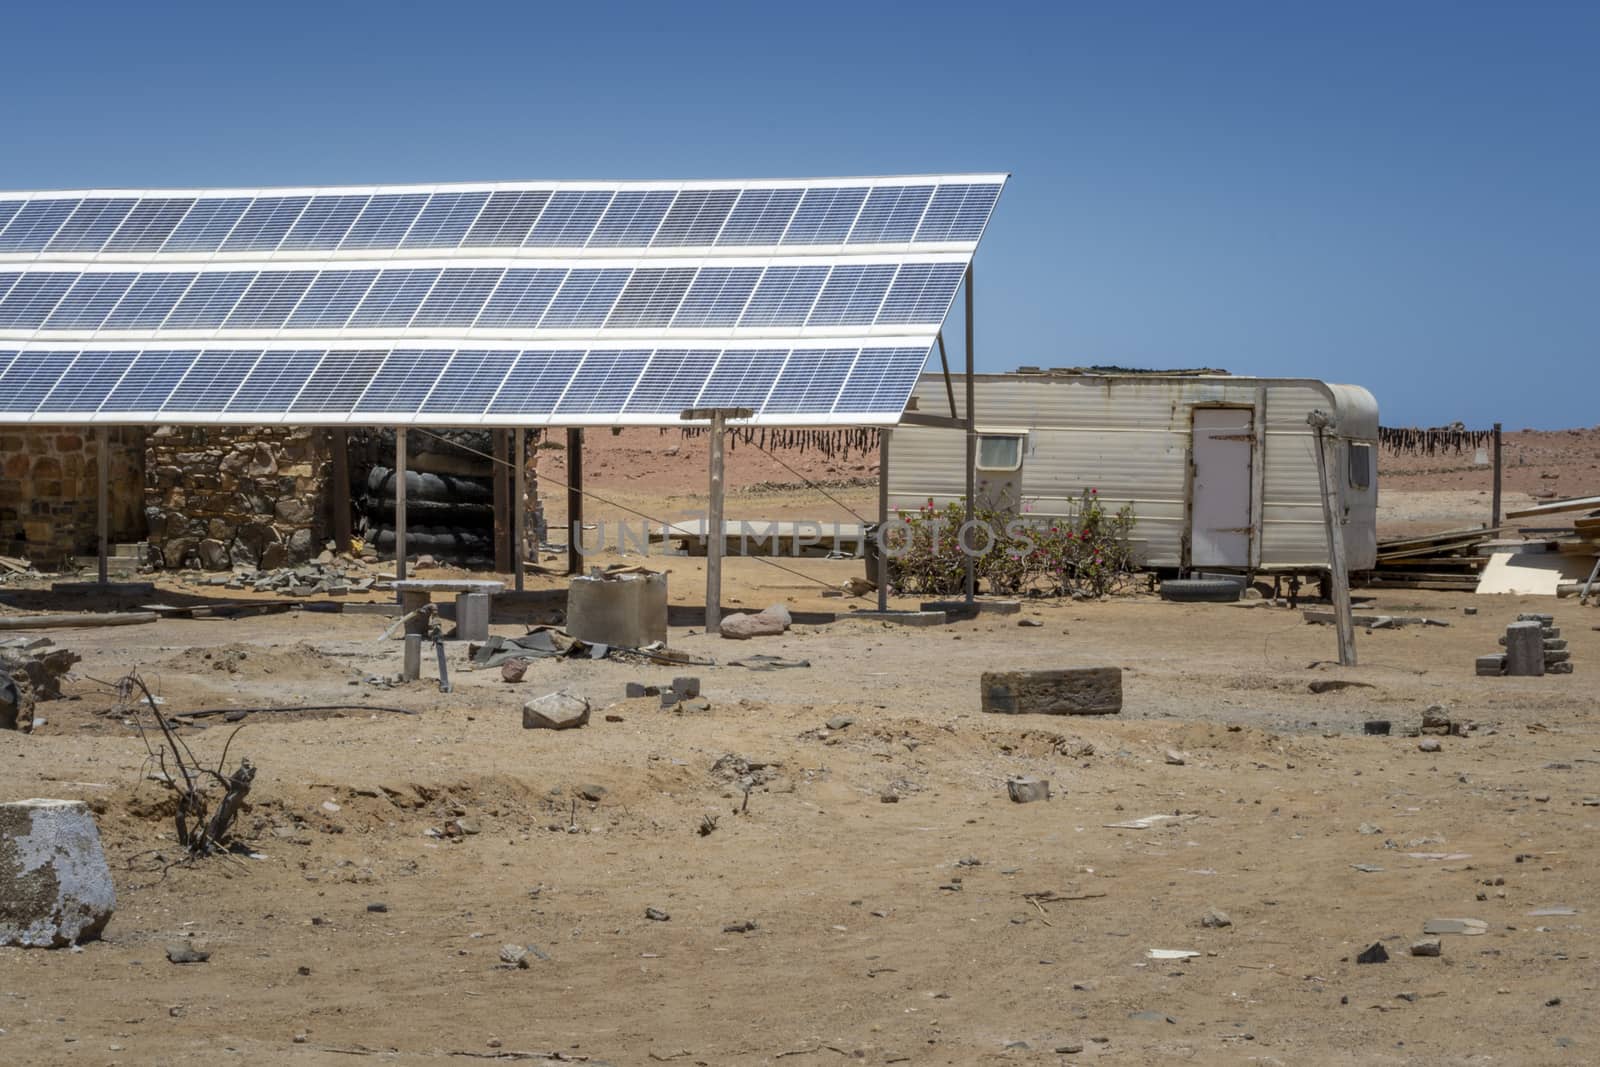 Off-grid solar installation in a messy trailer park in the desert by kb79